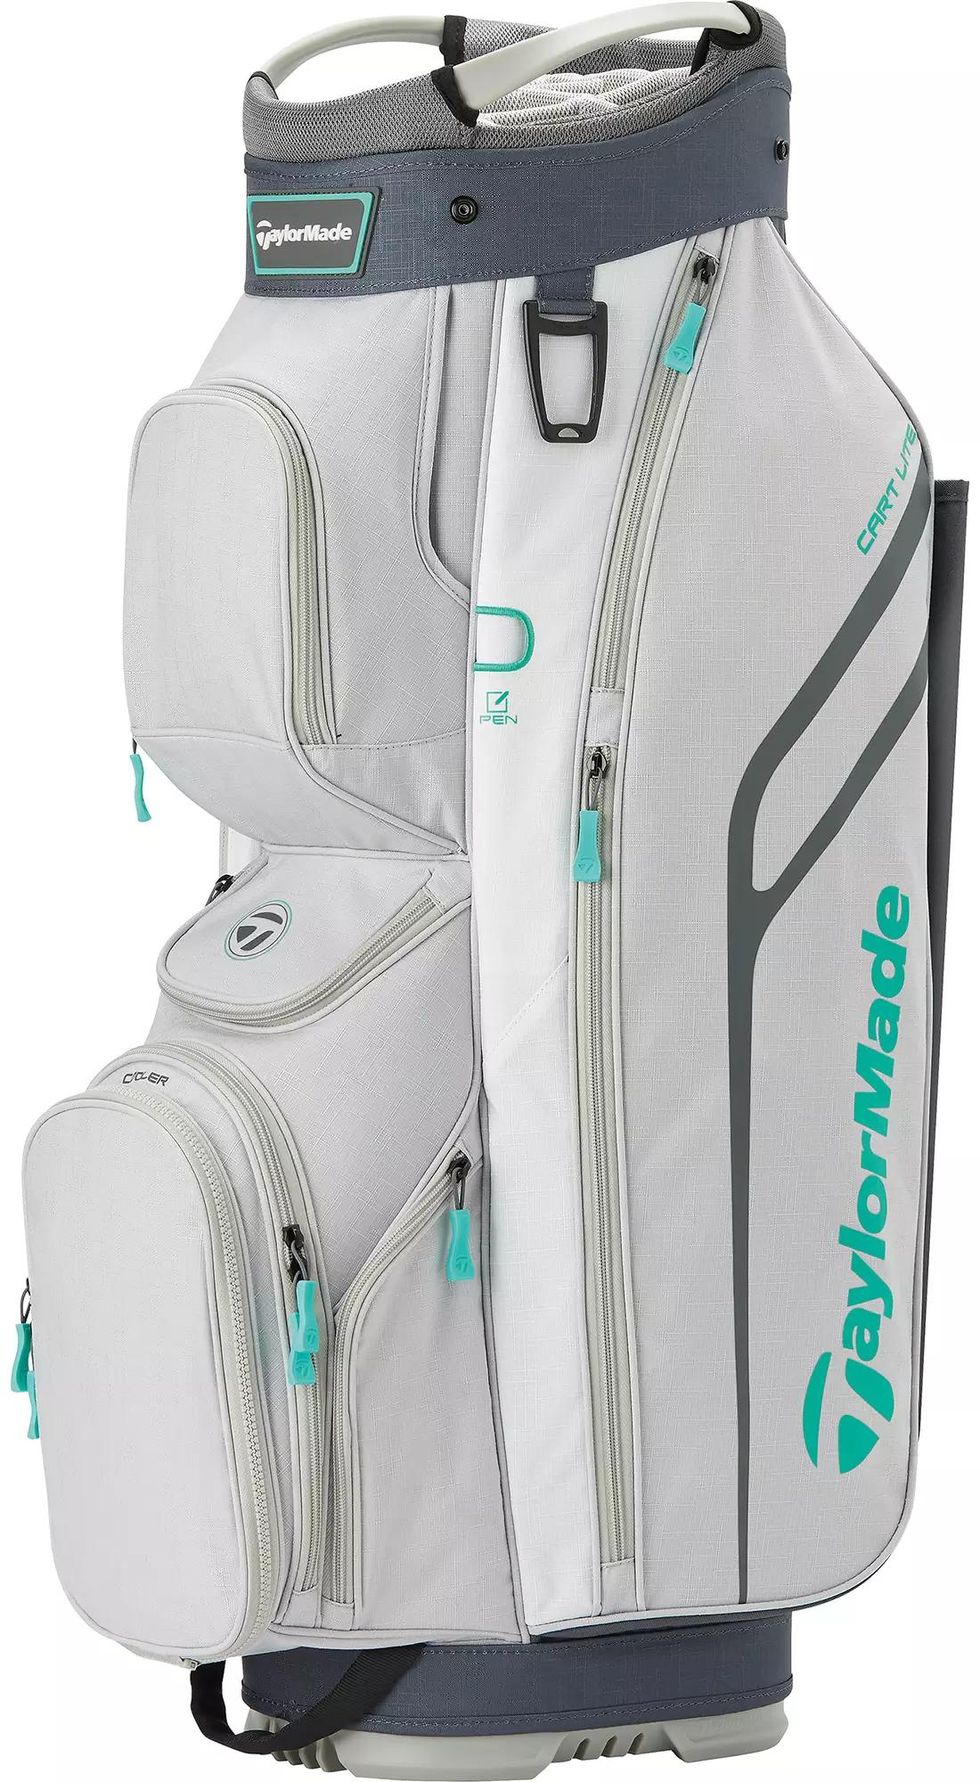 Stylish and functional: discover the best women's golf bags